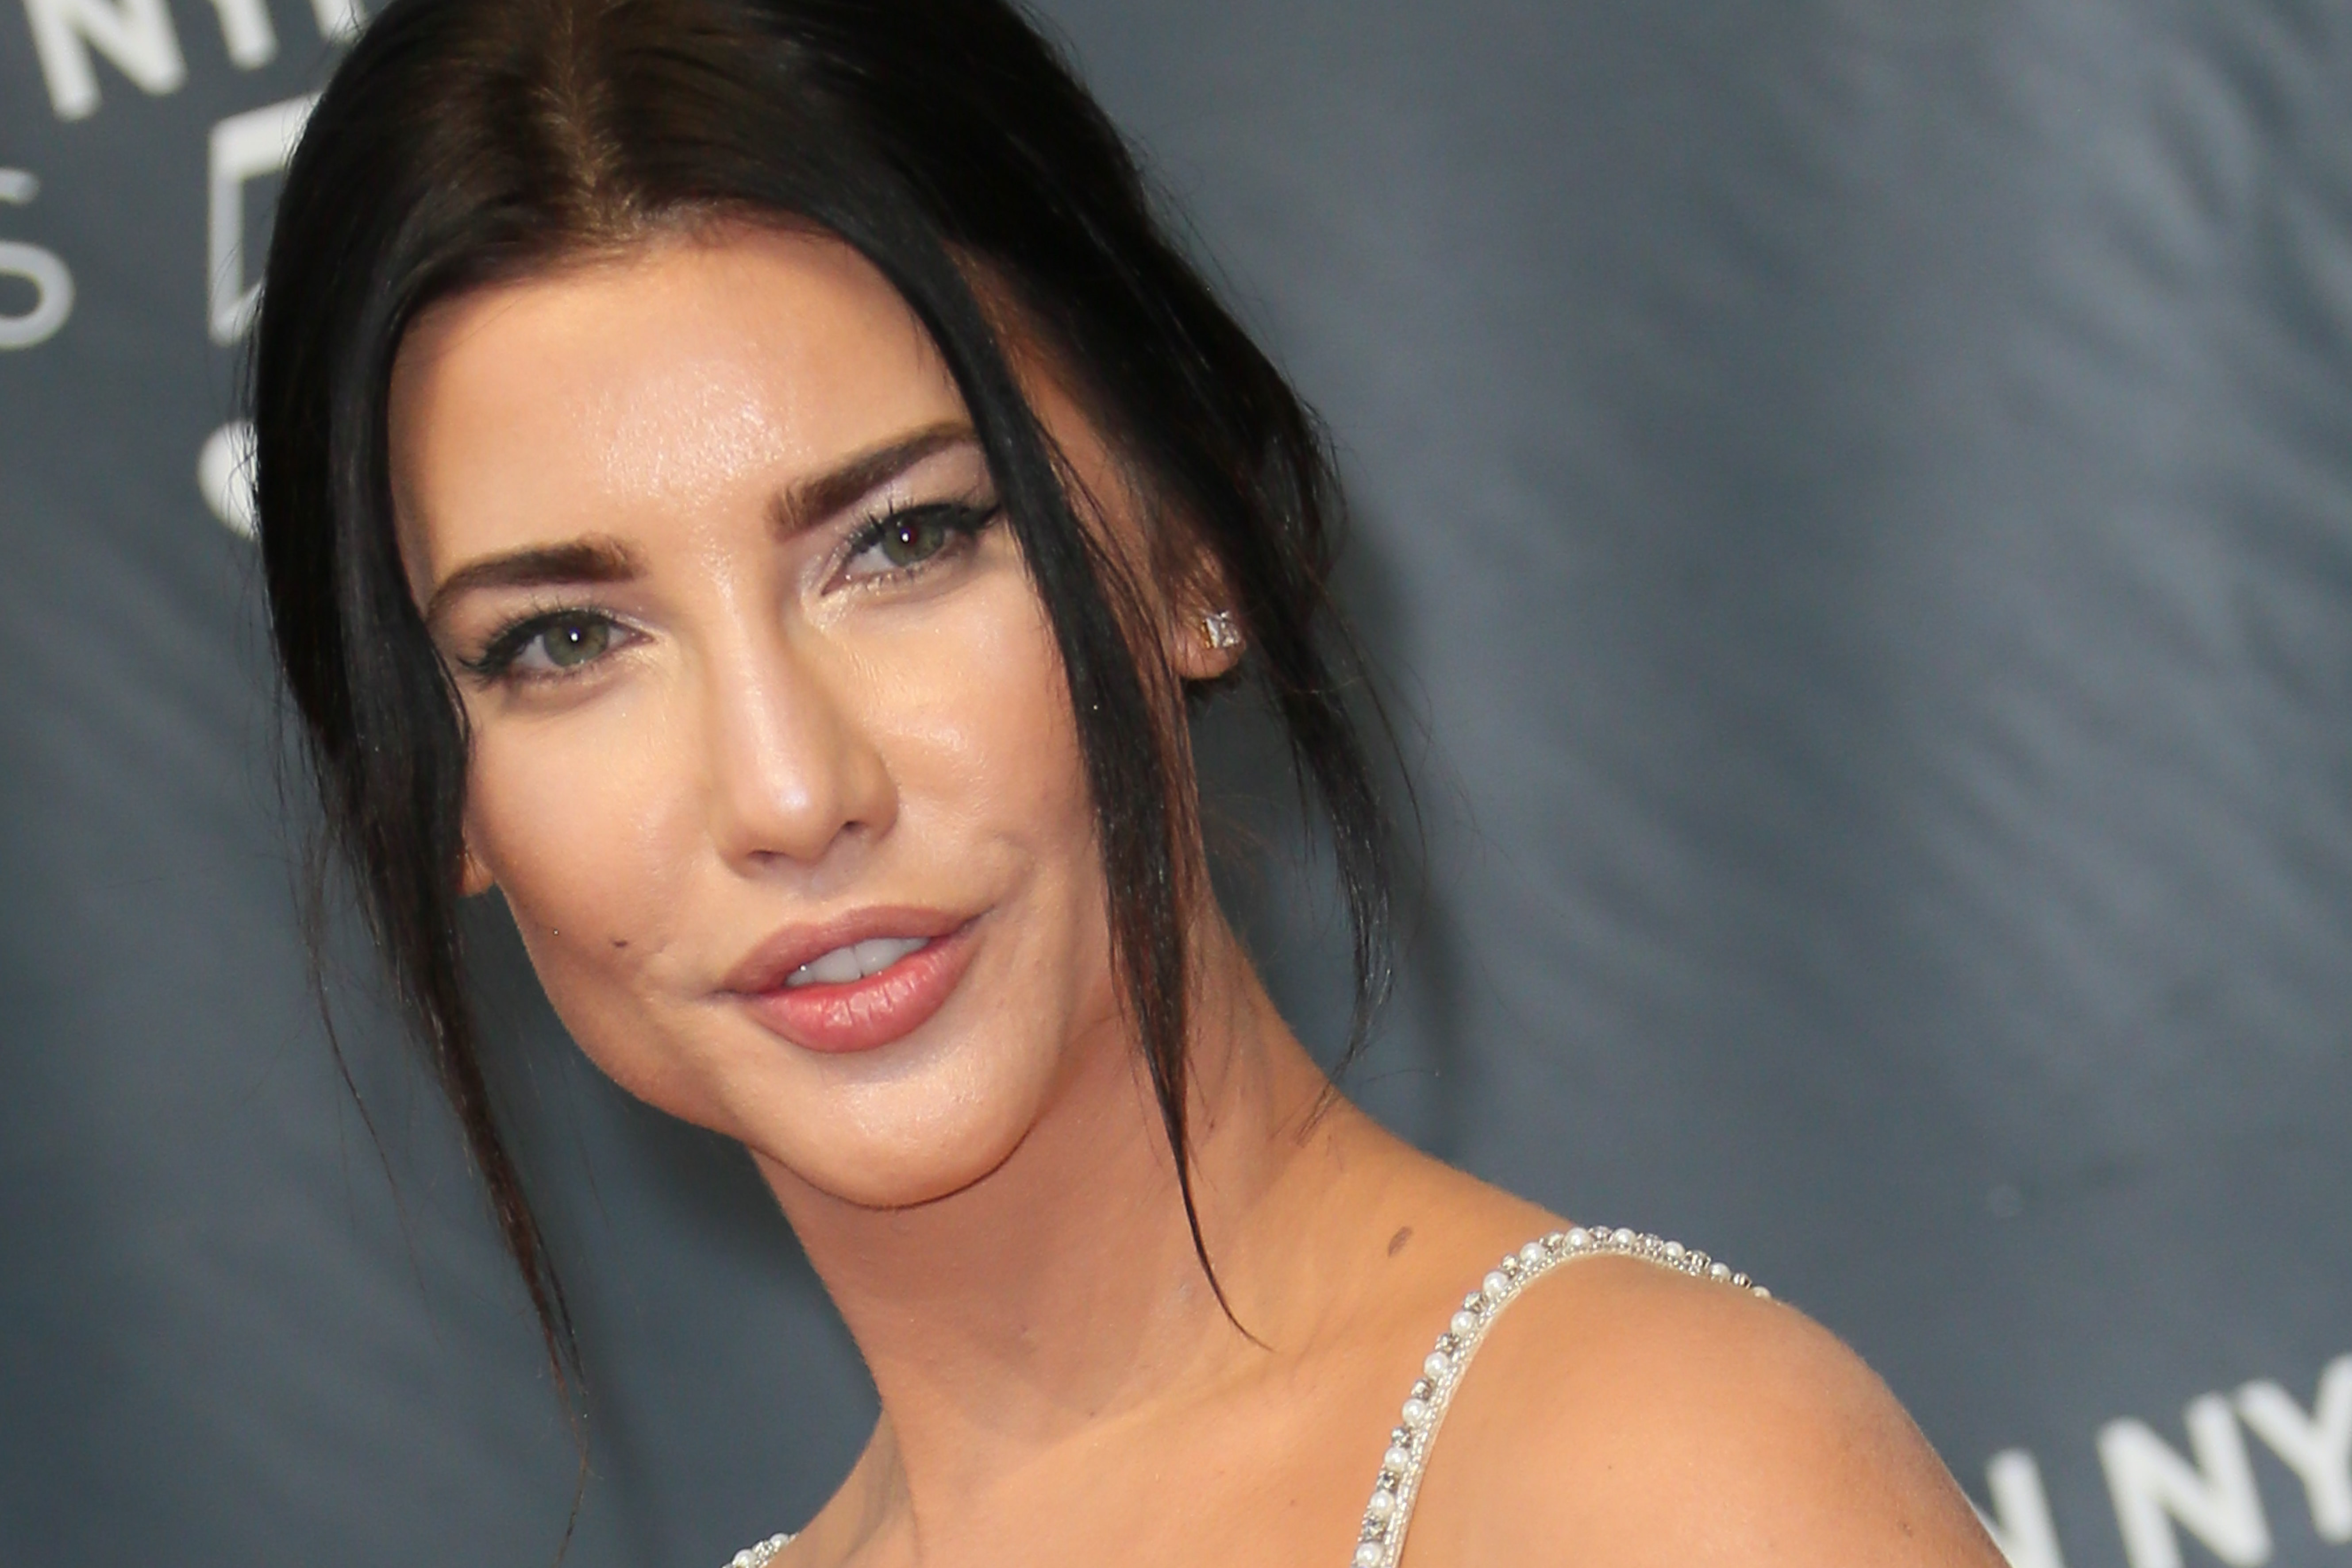 'The Bold and the Beautiful' actor Jacqueline MacInnes Wood wearing a white dress and smiling.